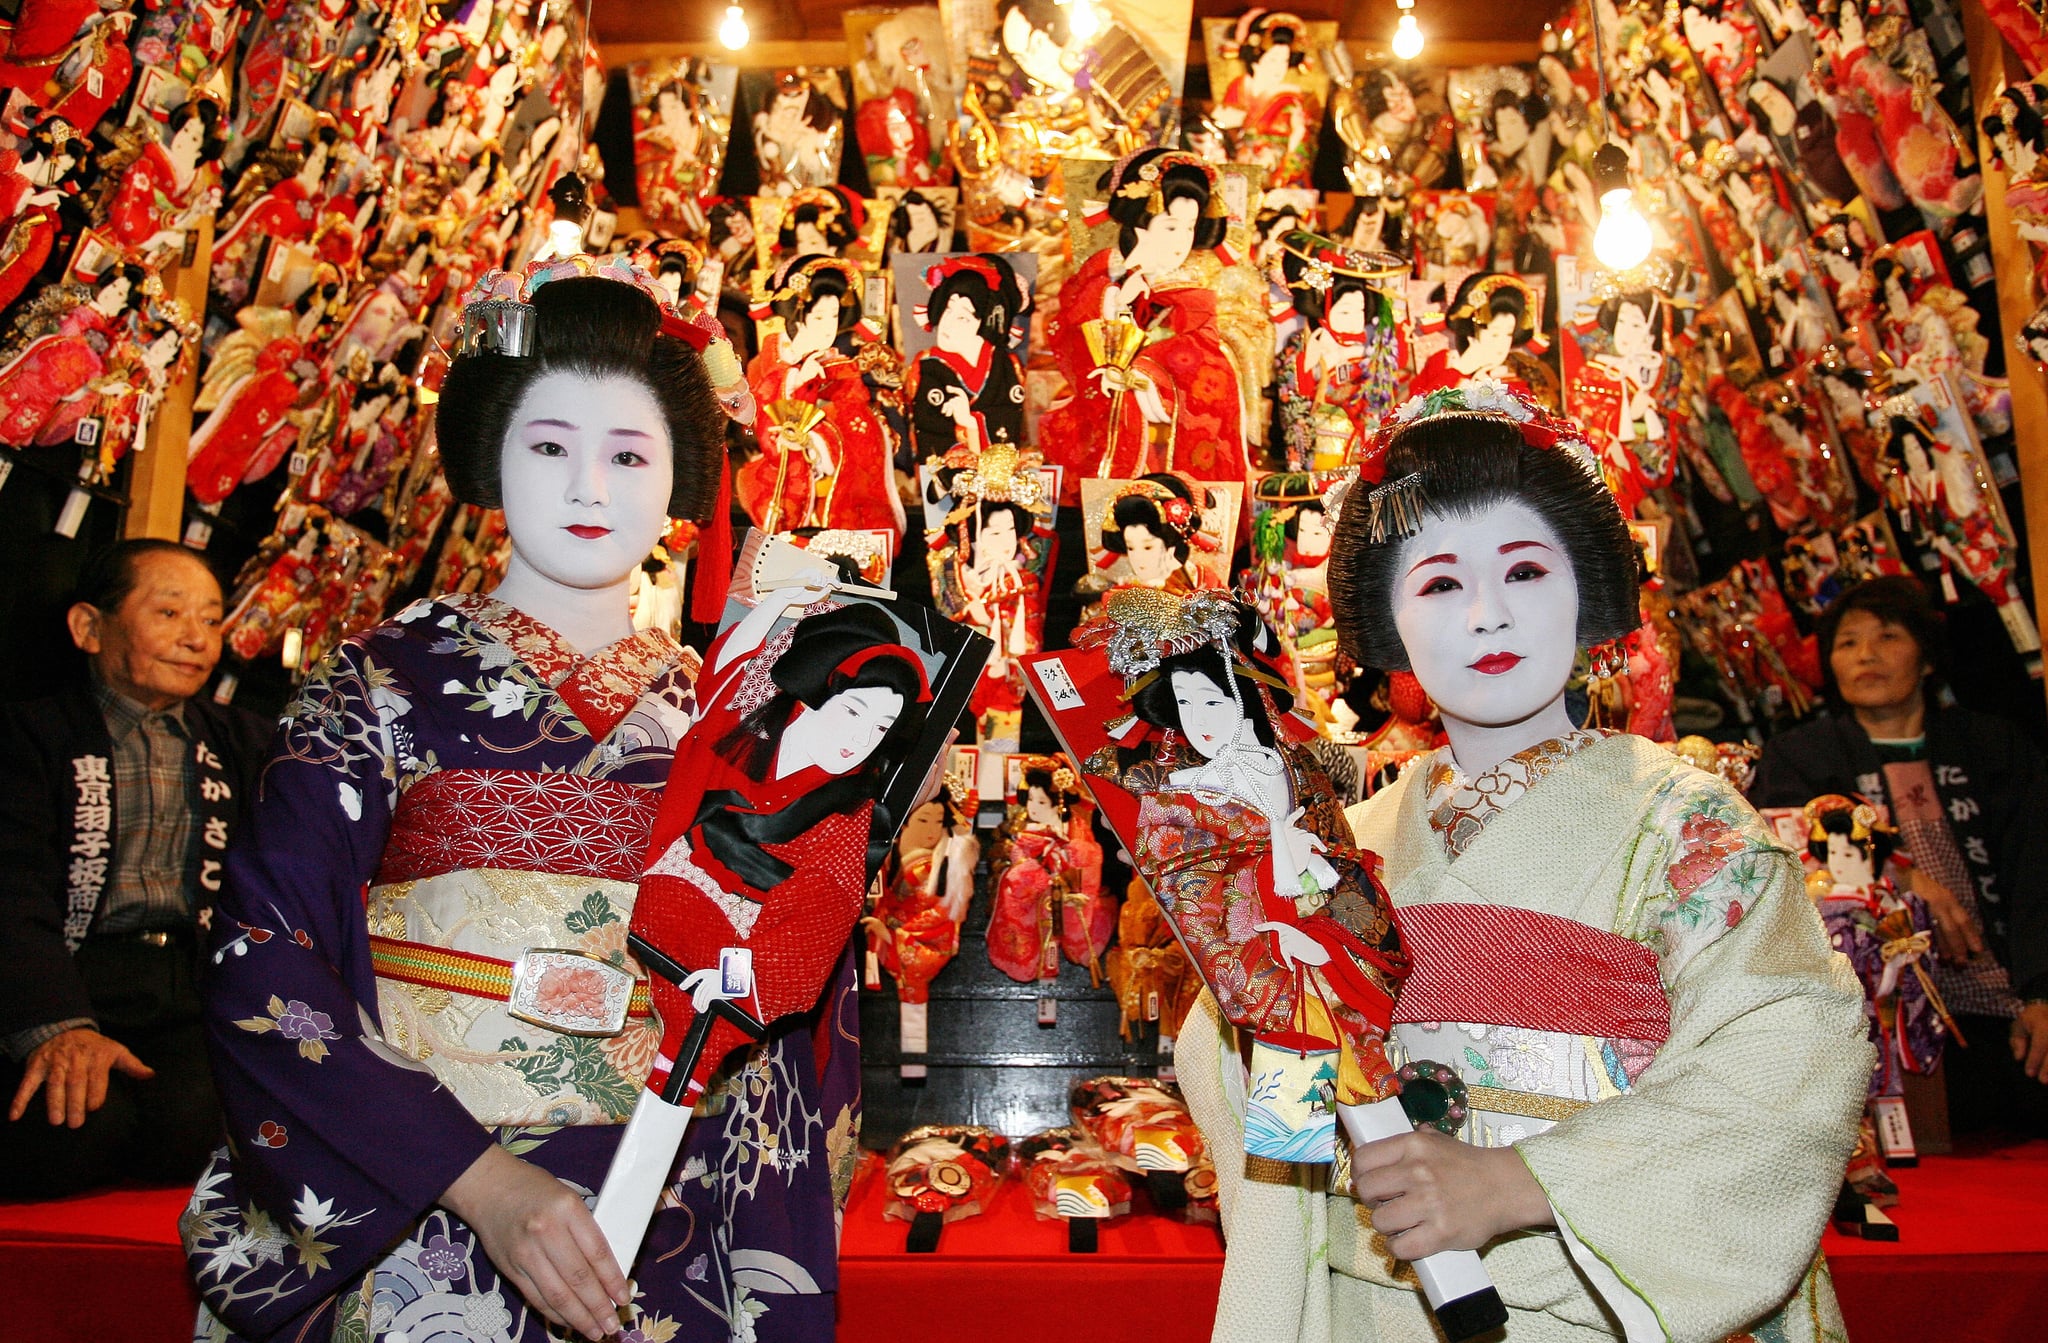 Modern Geishas in Japan Pretty Tradition or Outdated 